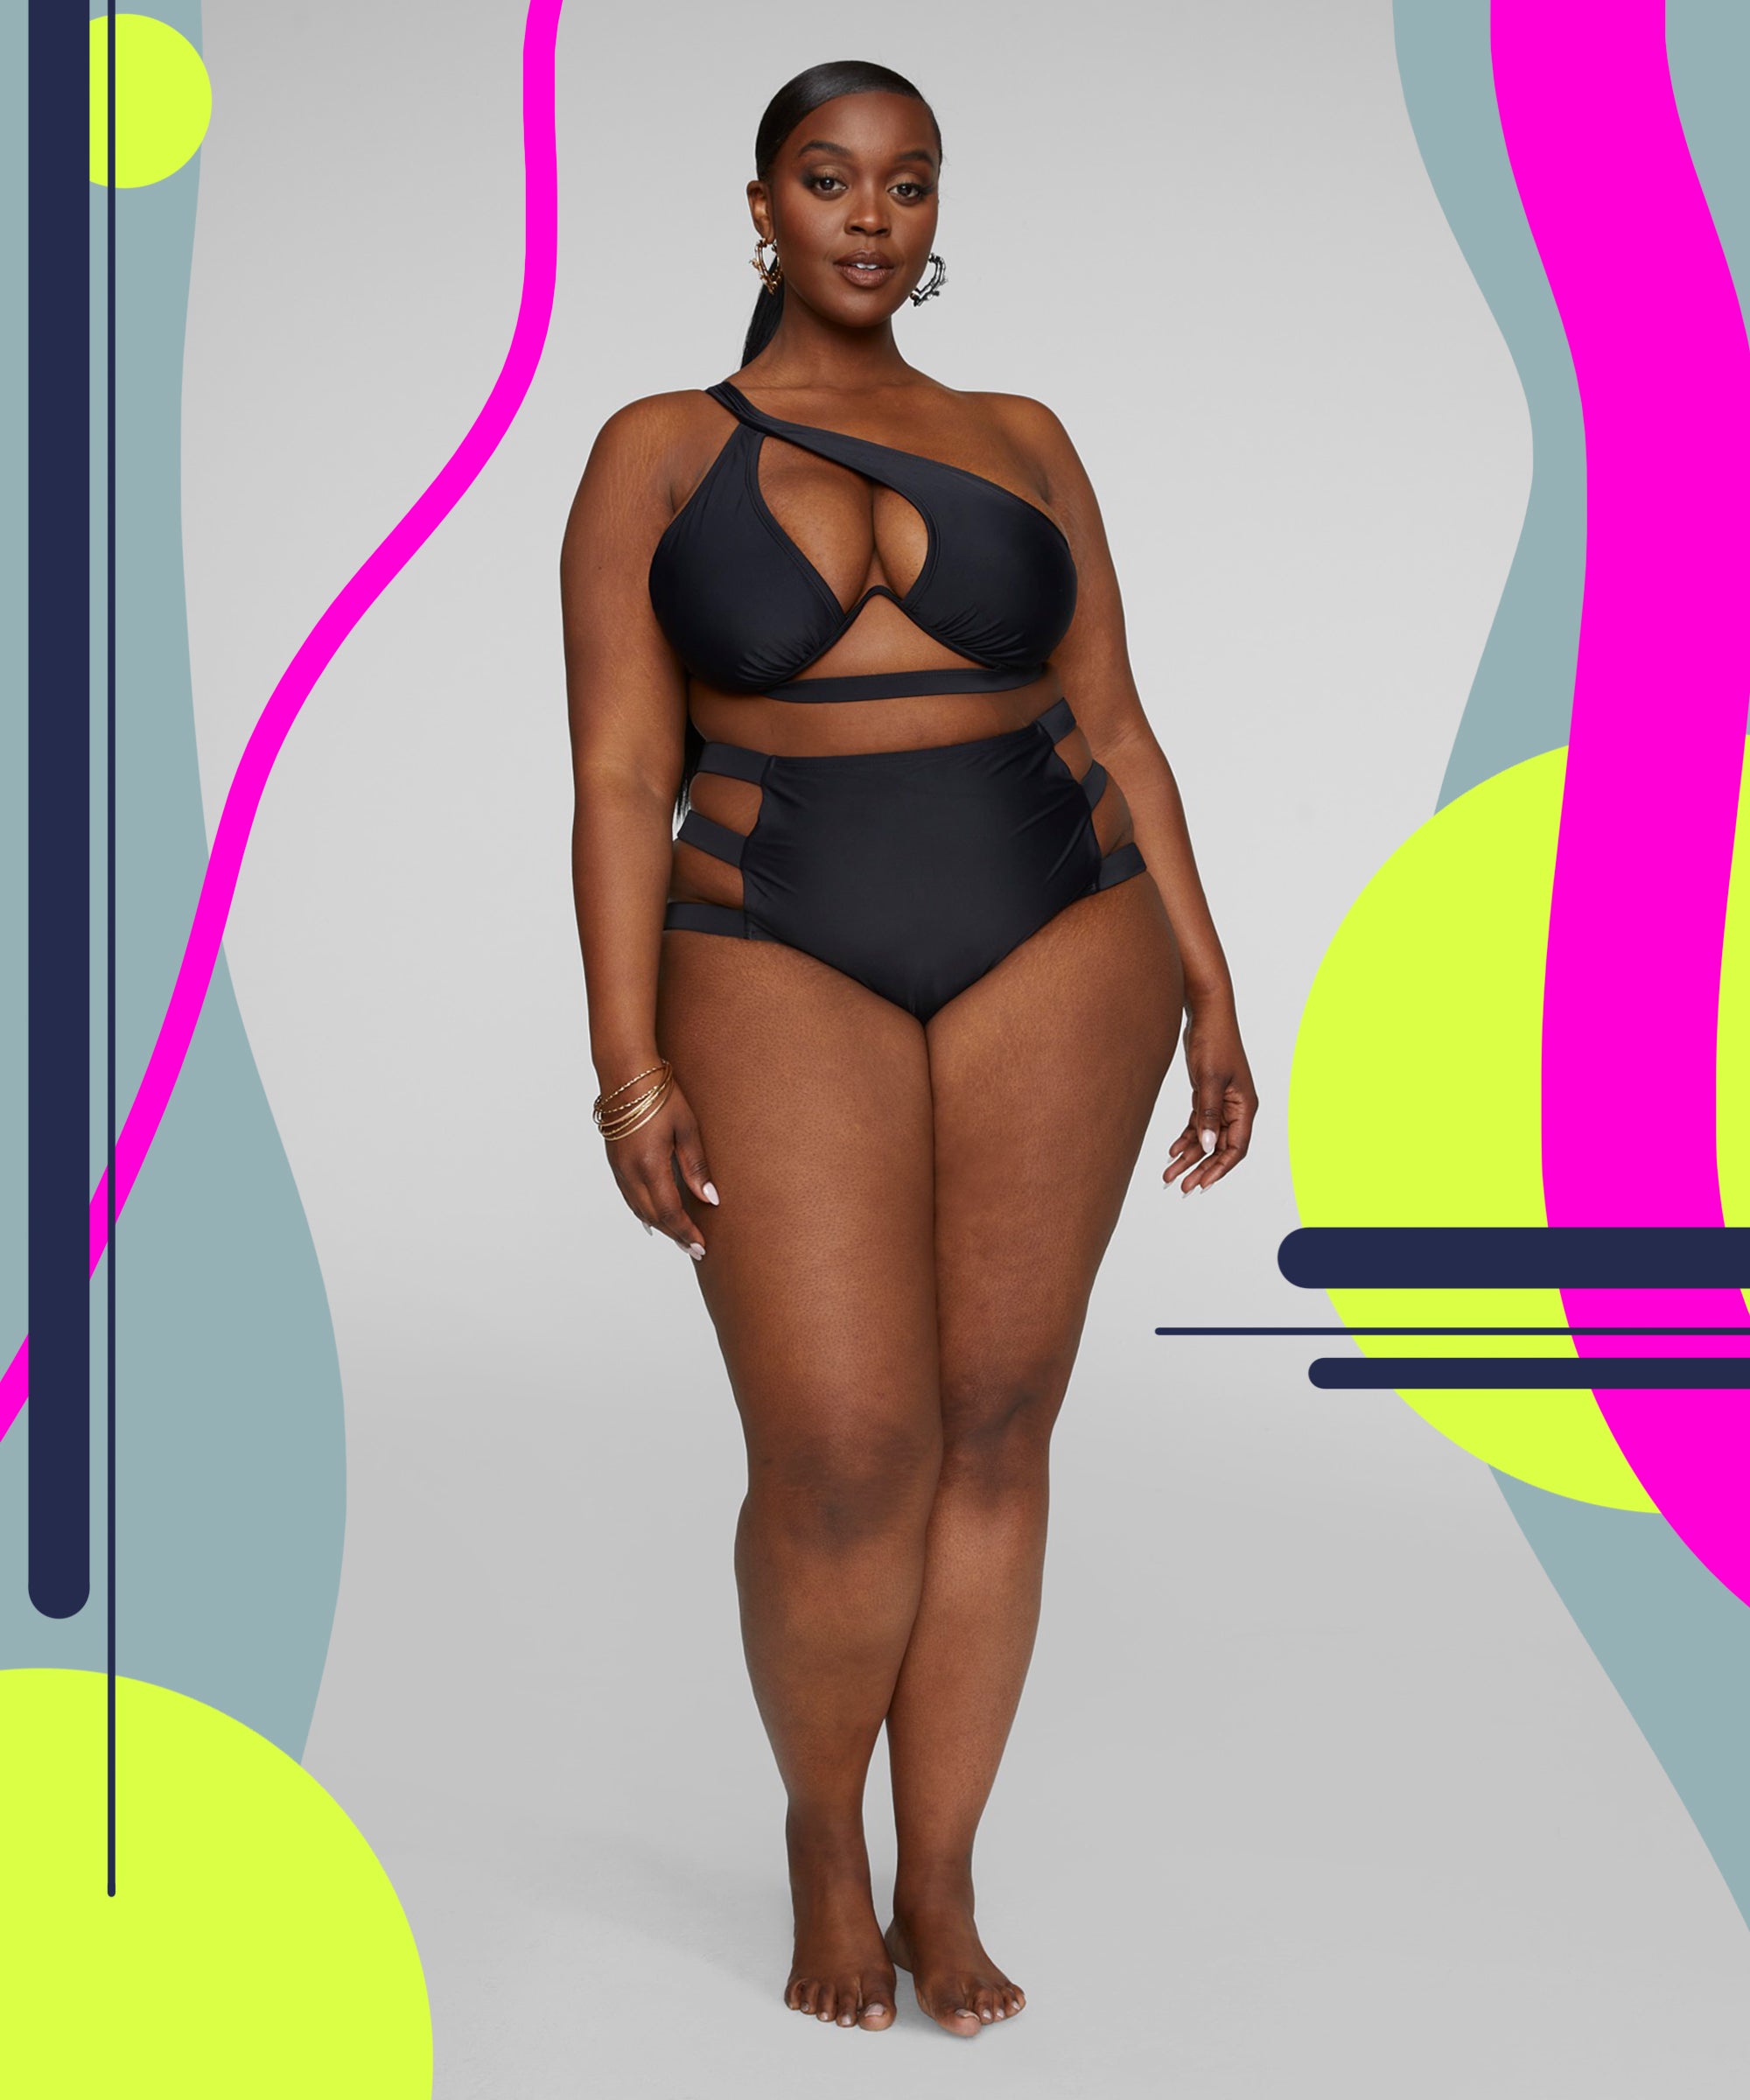 2022 Swimwear & Swimsuit Trends According To An Expert